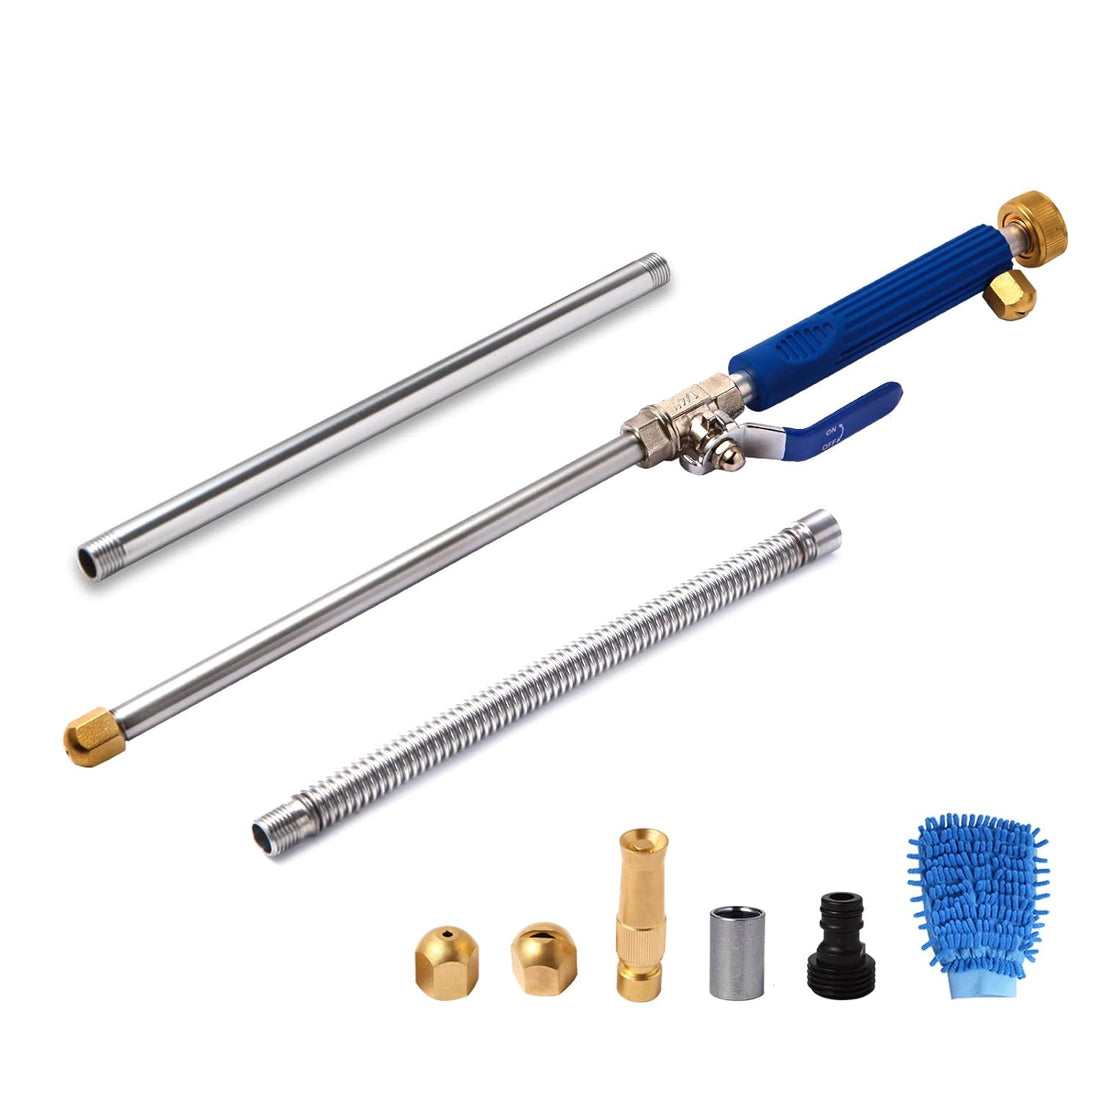 Hwylizg High Pressure Power Washer Wand, Hydro Jet Water Wand Pressure Sprayer,Flexible Garden Watering Wand with 3 Hose Nozzle Universal Hose End for Car Pet Window Patio Gutter Cleaning Tool Blue